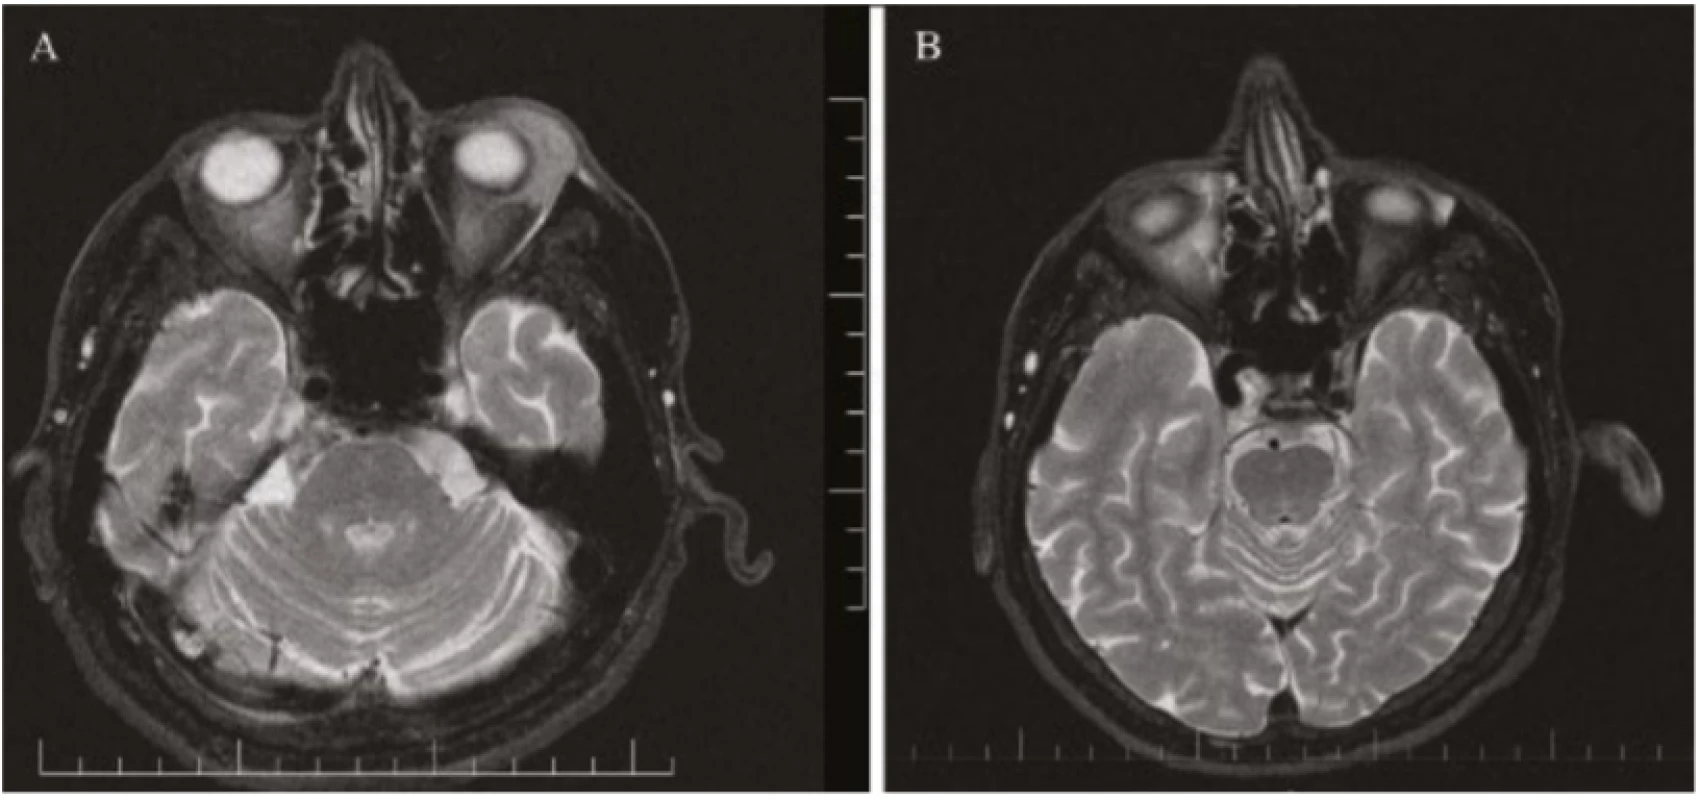 Fig. 5. Patient 2 – magnetic resonance of head: axial cross-section, T2 weighting, lymphoma of lower
left eyelid<br>
A) at time of diagnosis 01/2019<br>
B) following chemotherapy and immunological treatment 11/2019